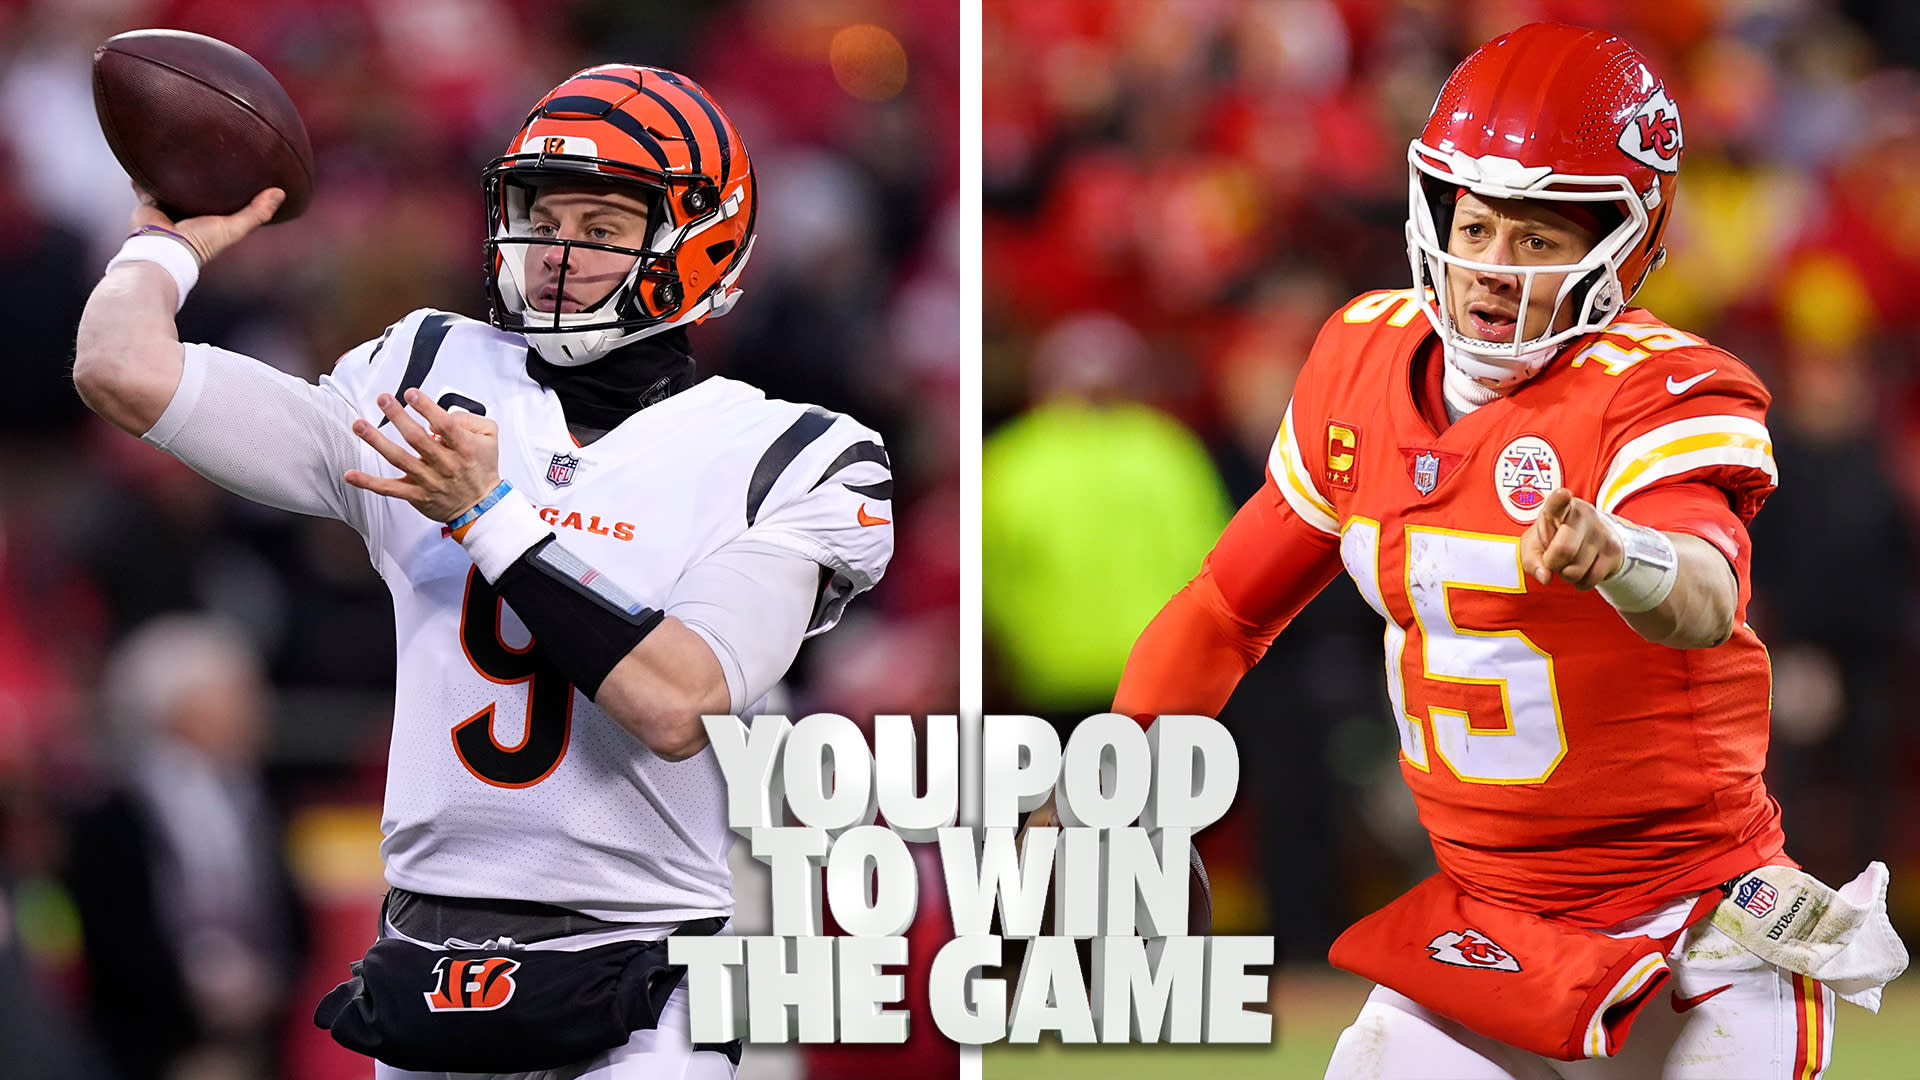 Bengals defense stepped up massively in second half vs Chiefs